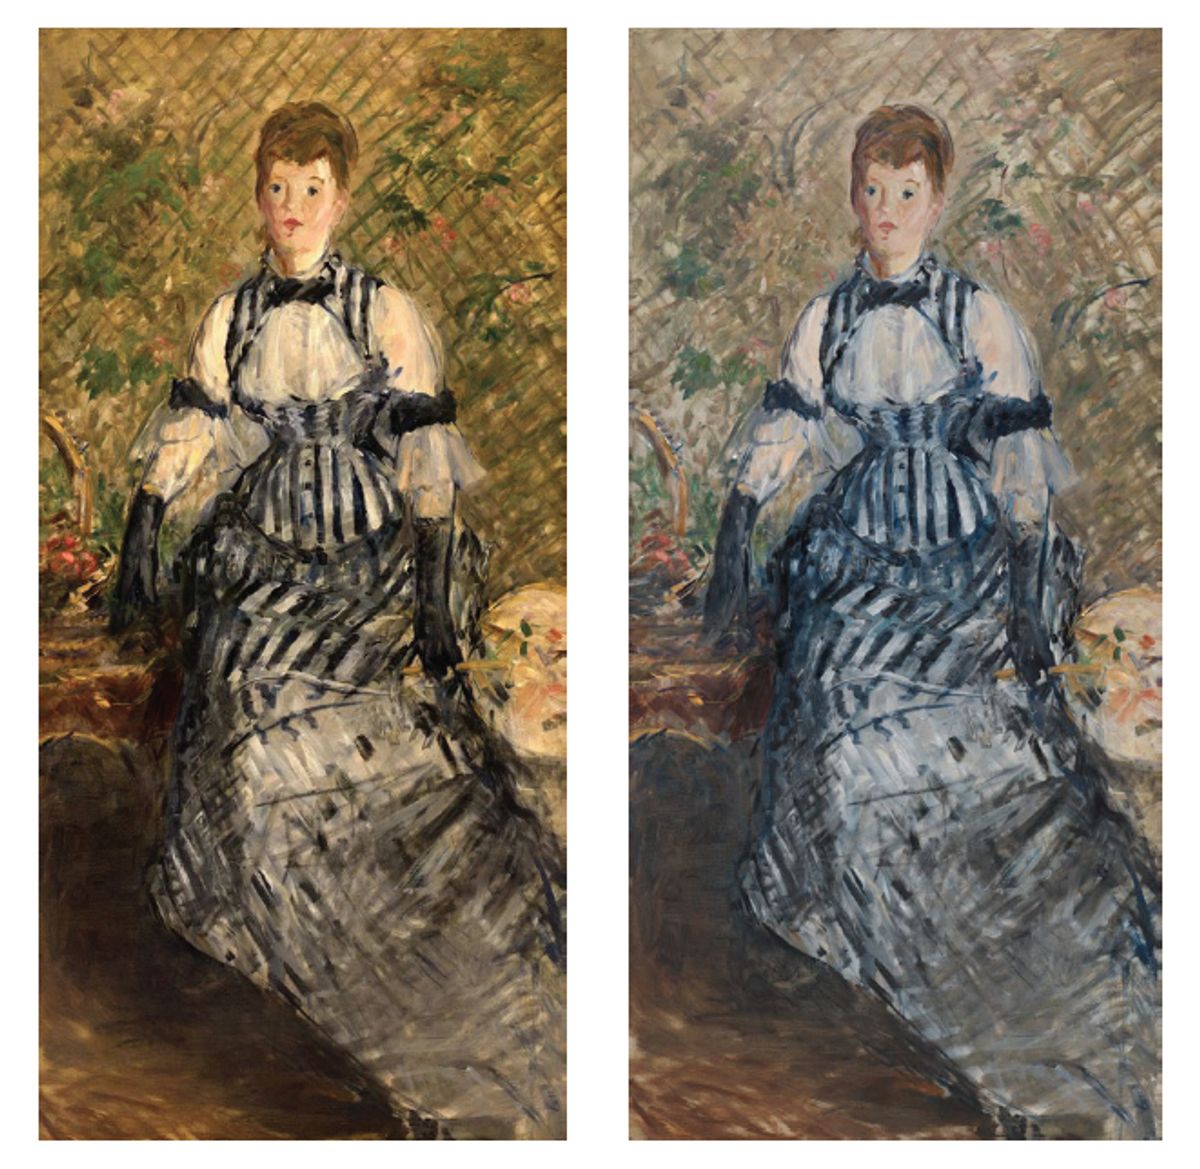 Édouard Manet, Woman in Striped Dress, before and after treatment, (1877-80) Solomon R. Guggenheim Foundation, 2018; photos: Kris McKay and Allison Chipak